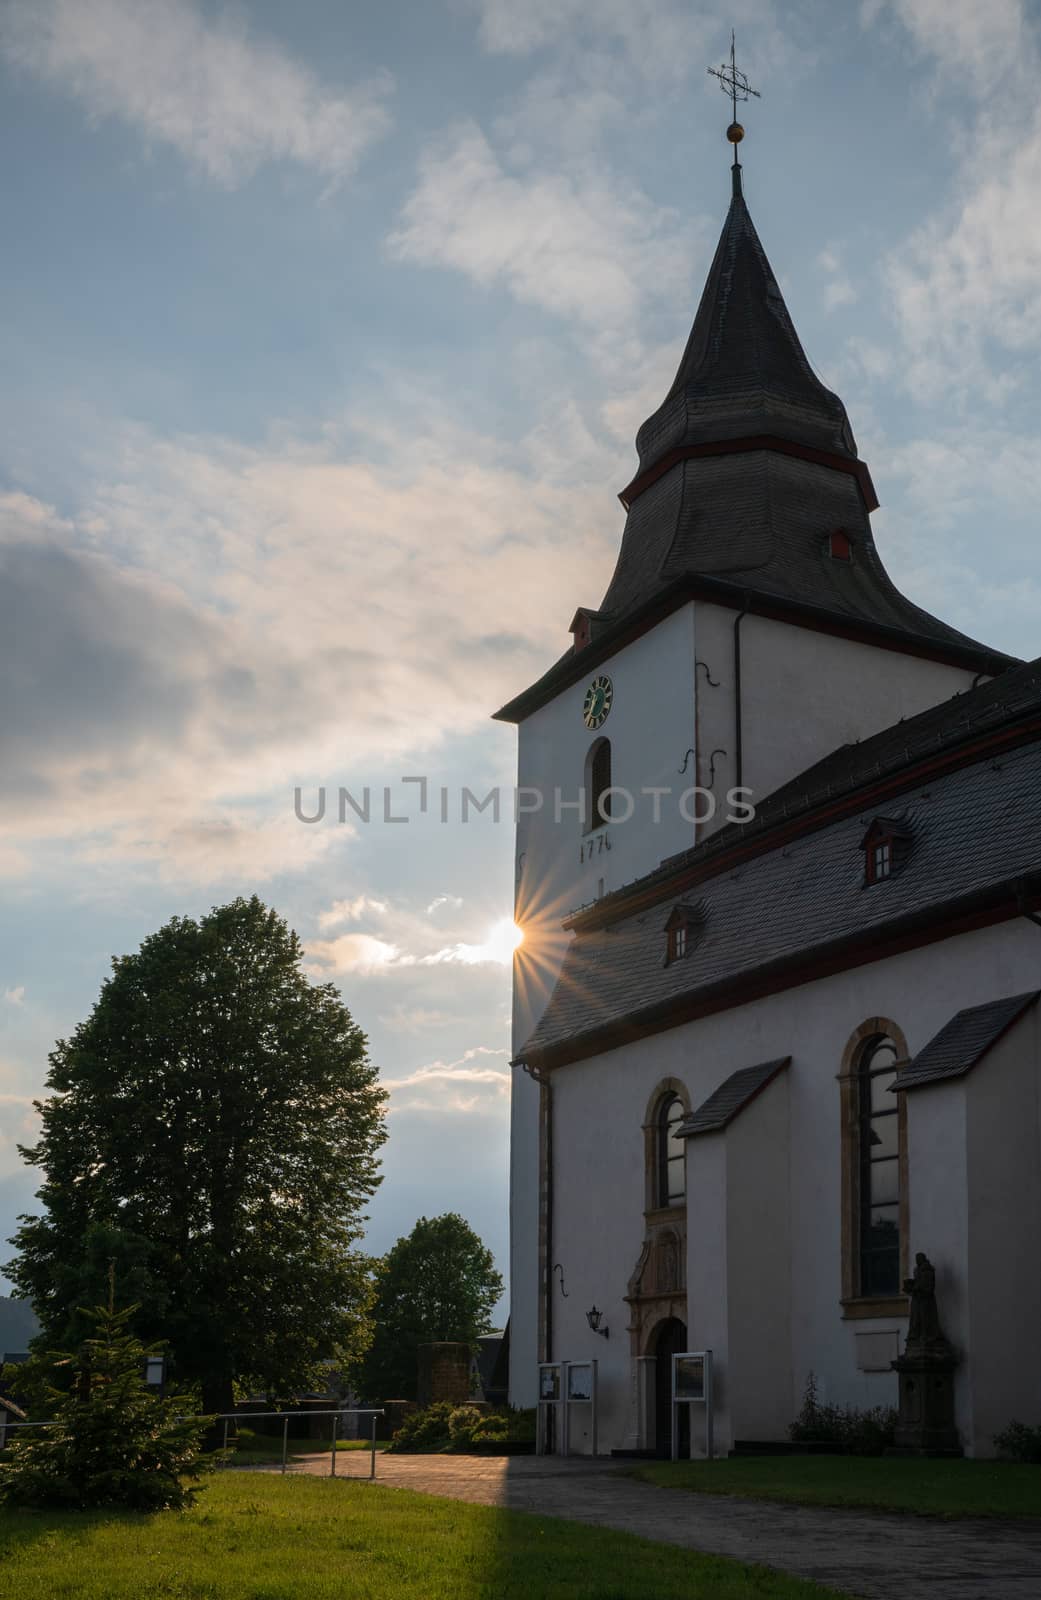 Atmospheric image of the Parish church of Winterberg at sunset with evening sun